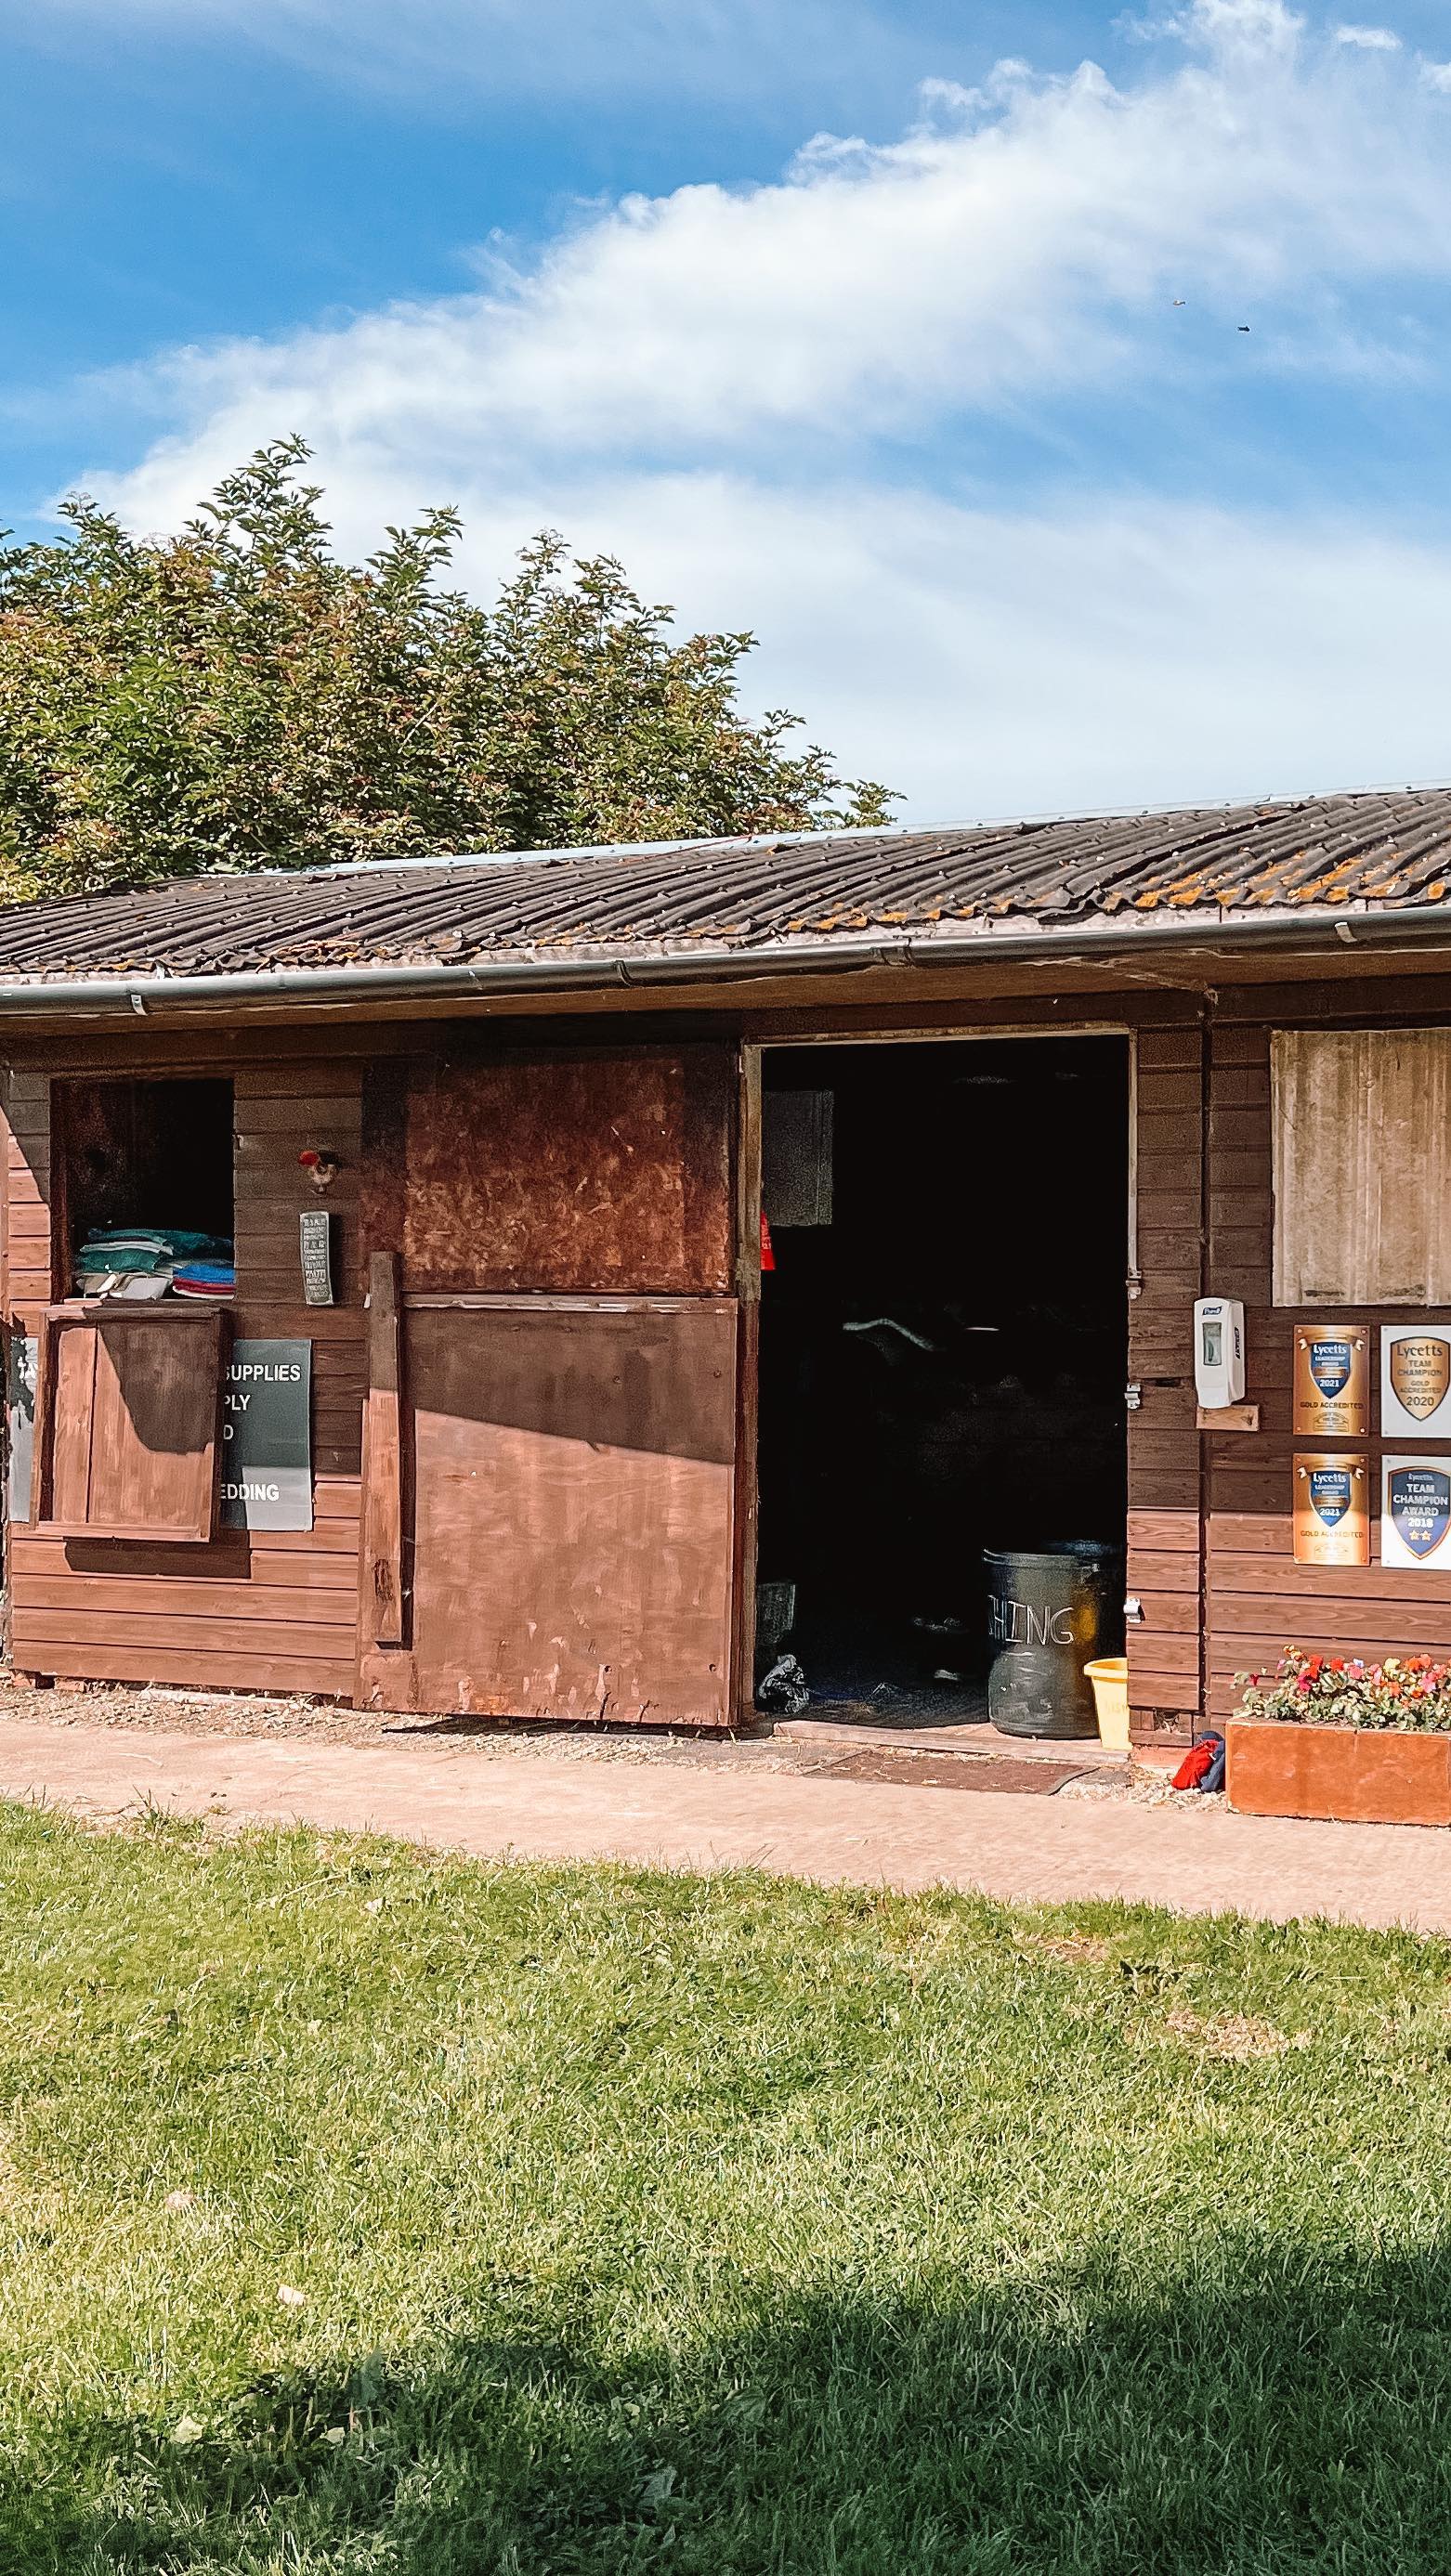 A d| As part of National Racehorse Week, Girsonfield Stud & Racing will be opening its doors to the public on 11th September. Like I did you can go and see how they train racehorses. They’re based in Otterburn in Northumberland and this is what you can expect from the day…

👨‍👩‍👧‍👦 family friends with activities for the kids 
🚗 plenty of parking 
🤝 a welcome intro by Trainer Susan Corbett
🏇🏻demonstrations from the staff riding the racehorses on the gallops
👨‍⚕️a veterinary, physio and chiropractor demo on the care of the horse that all go to make the healthiest lifestyle possible for the Racehorses
🐎 You can meet all the racehorses in training and also the mares and foals - the future stars of the yard, as Girsonfield also have a small breeding side with their retired winning mares becoming the brood mares of the future.

If you’re into horse racing or horses in general it’s a great day out and so interesting to see them all. This is one of many yards across the country opening for National Racehorse week by @greatbritishracing 

#livetheracehorse #nationalracehorseweek #greatbritishracing
⠀⠀⠀⠀⠀⠀⠀⠀⠀
Find out more on the website nationalracehorseweek.uk the link is also in my stories from yesterday. 
⠀⠀⠀⠀⠀⠀⠀⠀⠀
 #horserace #horseracing #racehorse #otterburn #racingyard #northumberland  #northumberland #familydayout #northeast #ournorthumberland #northumberlandnationalpark #northumberland_pics #northeastcaptures #northumberland_uk